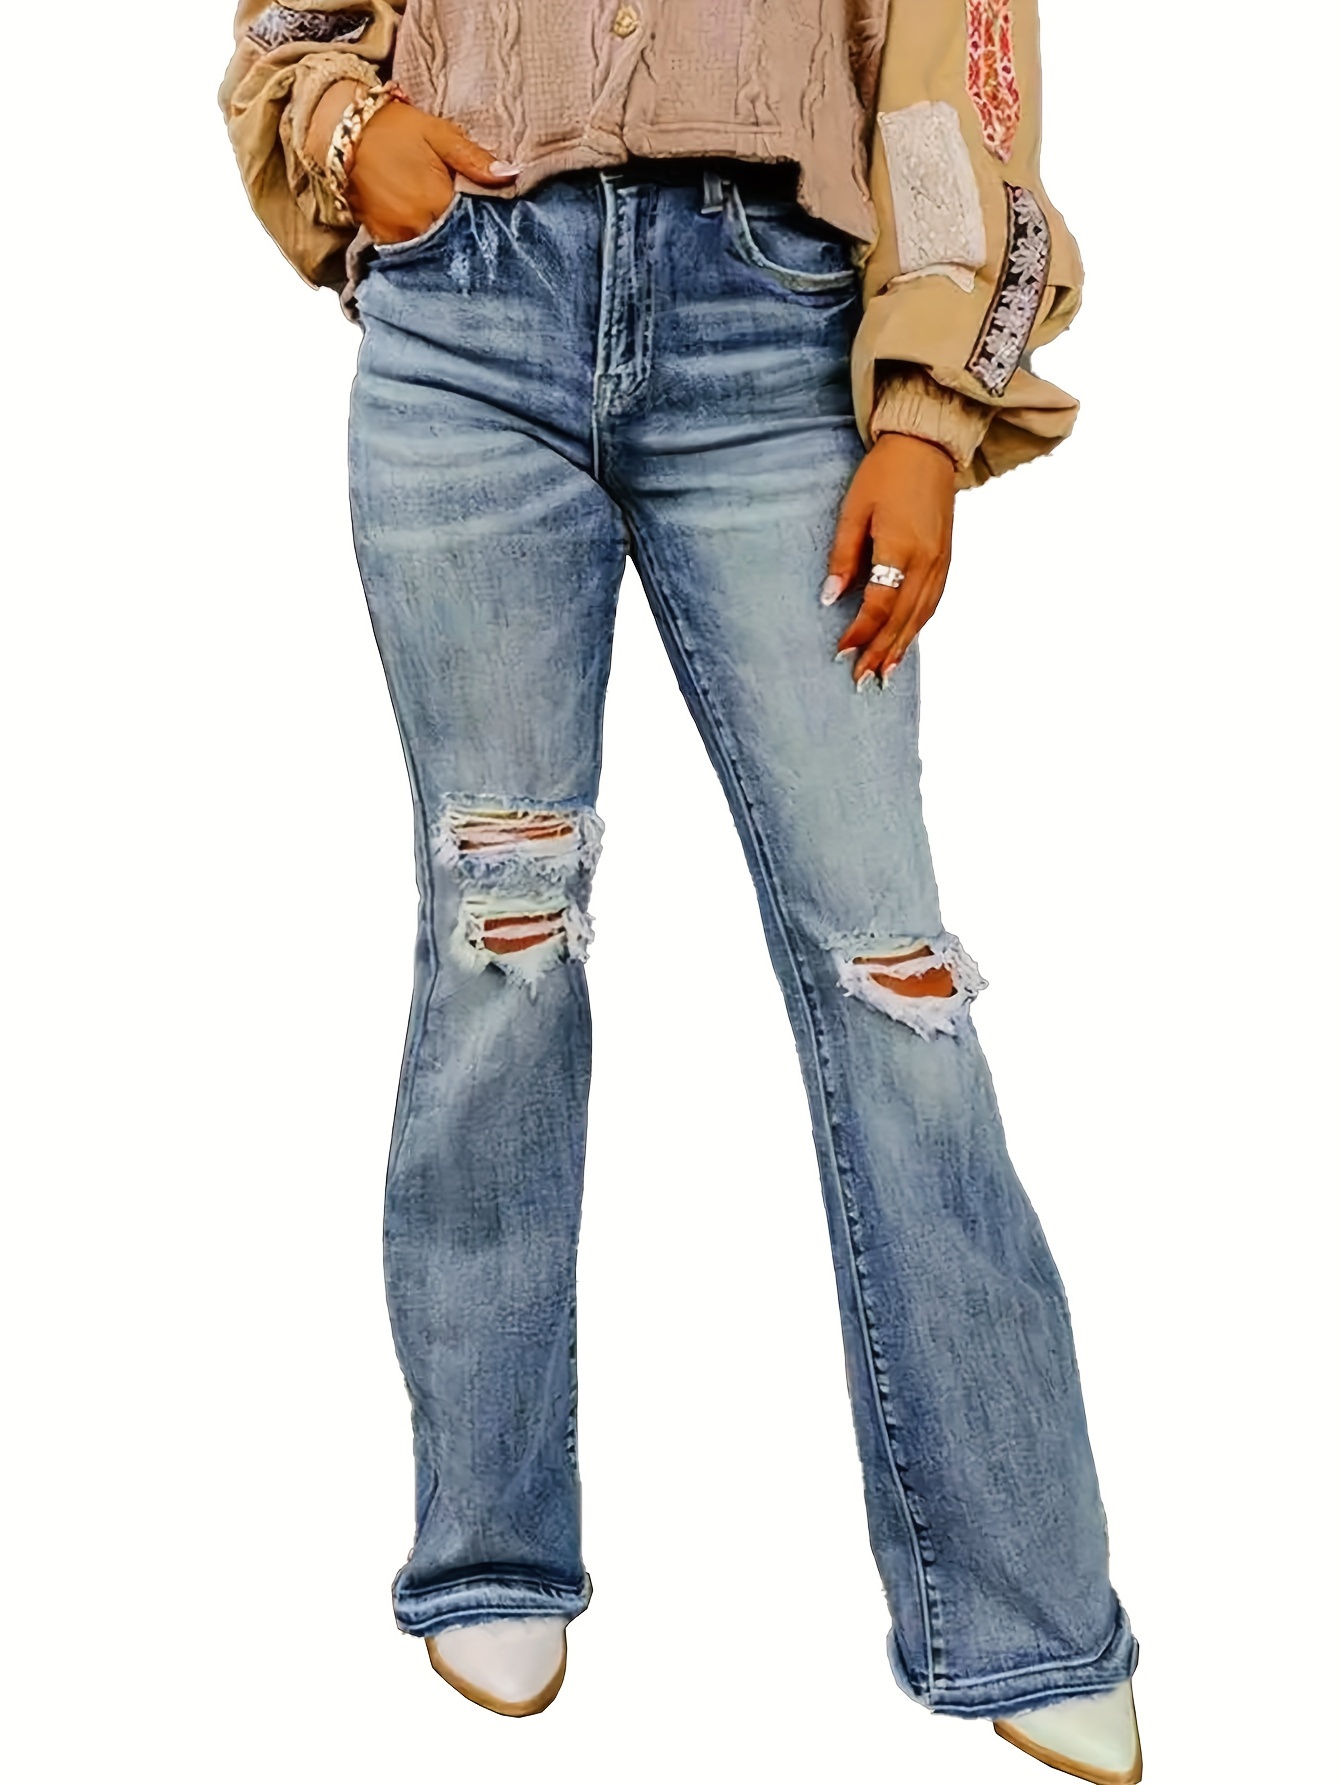 Vintage Flare Leg Ripped Jeans, Distressed High Rise Whiskering